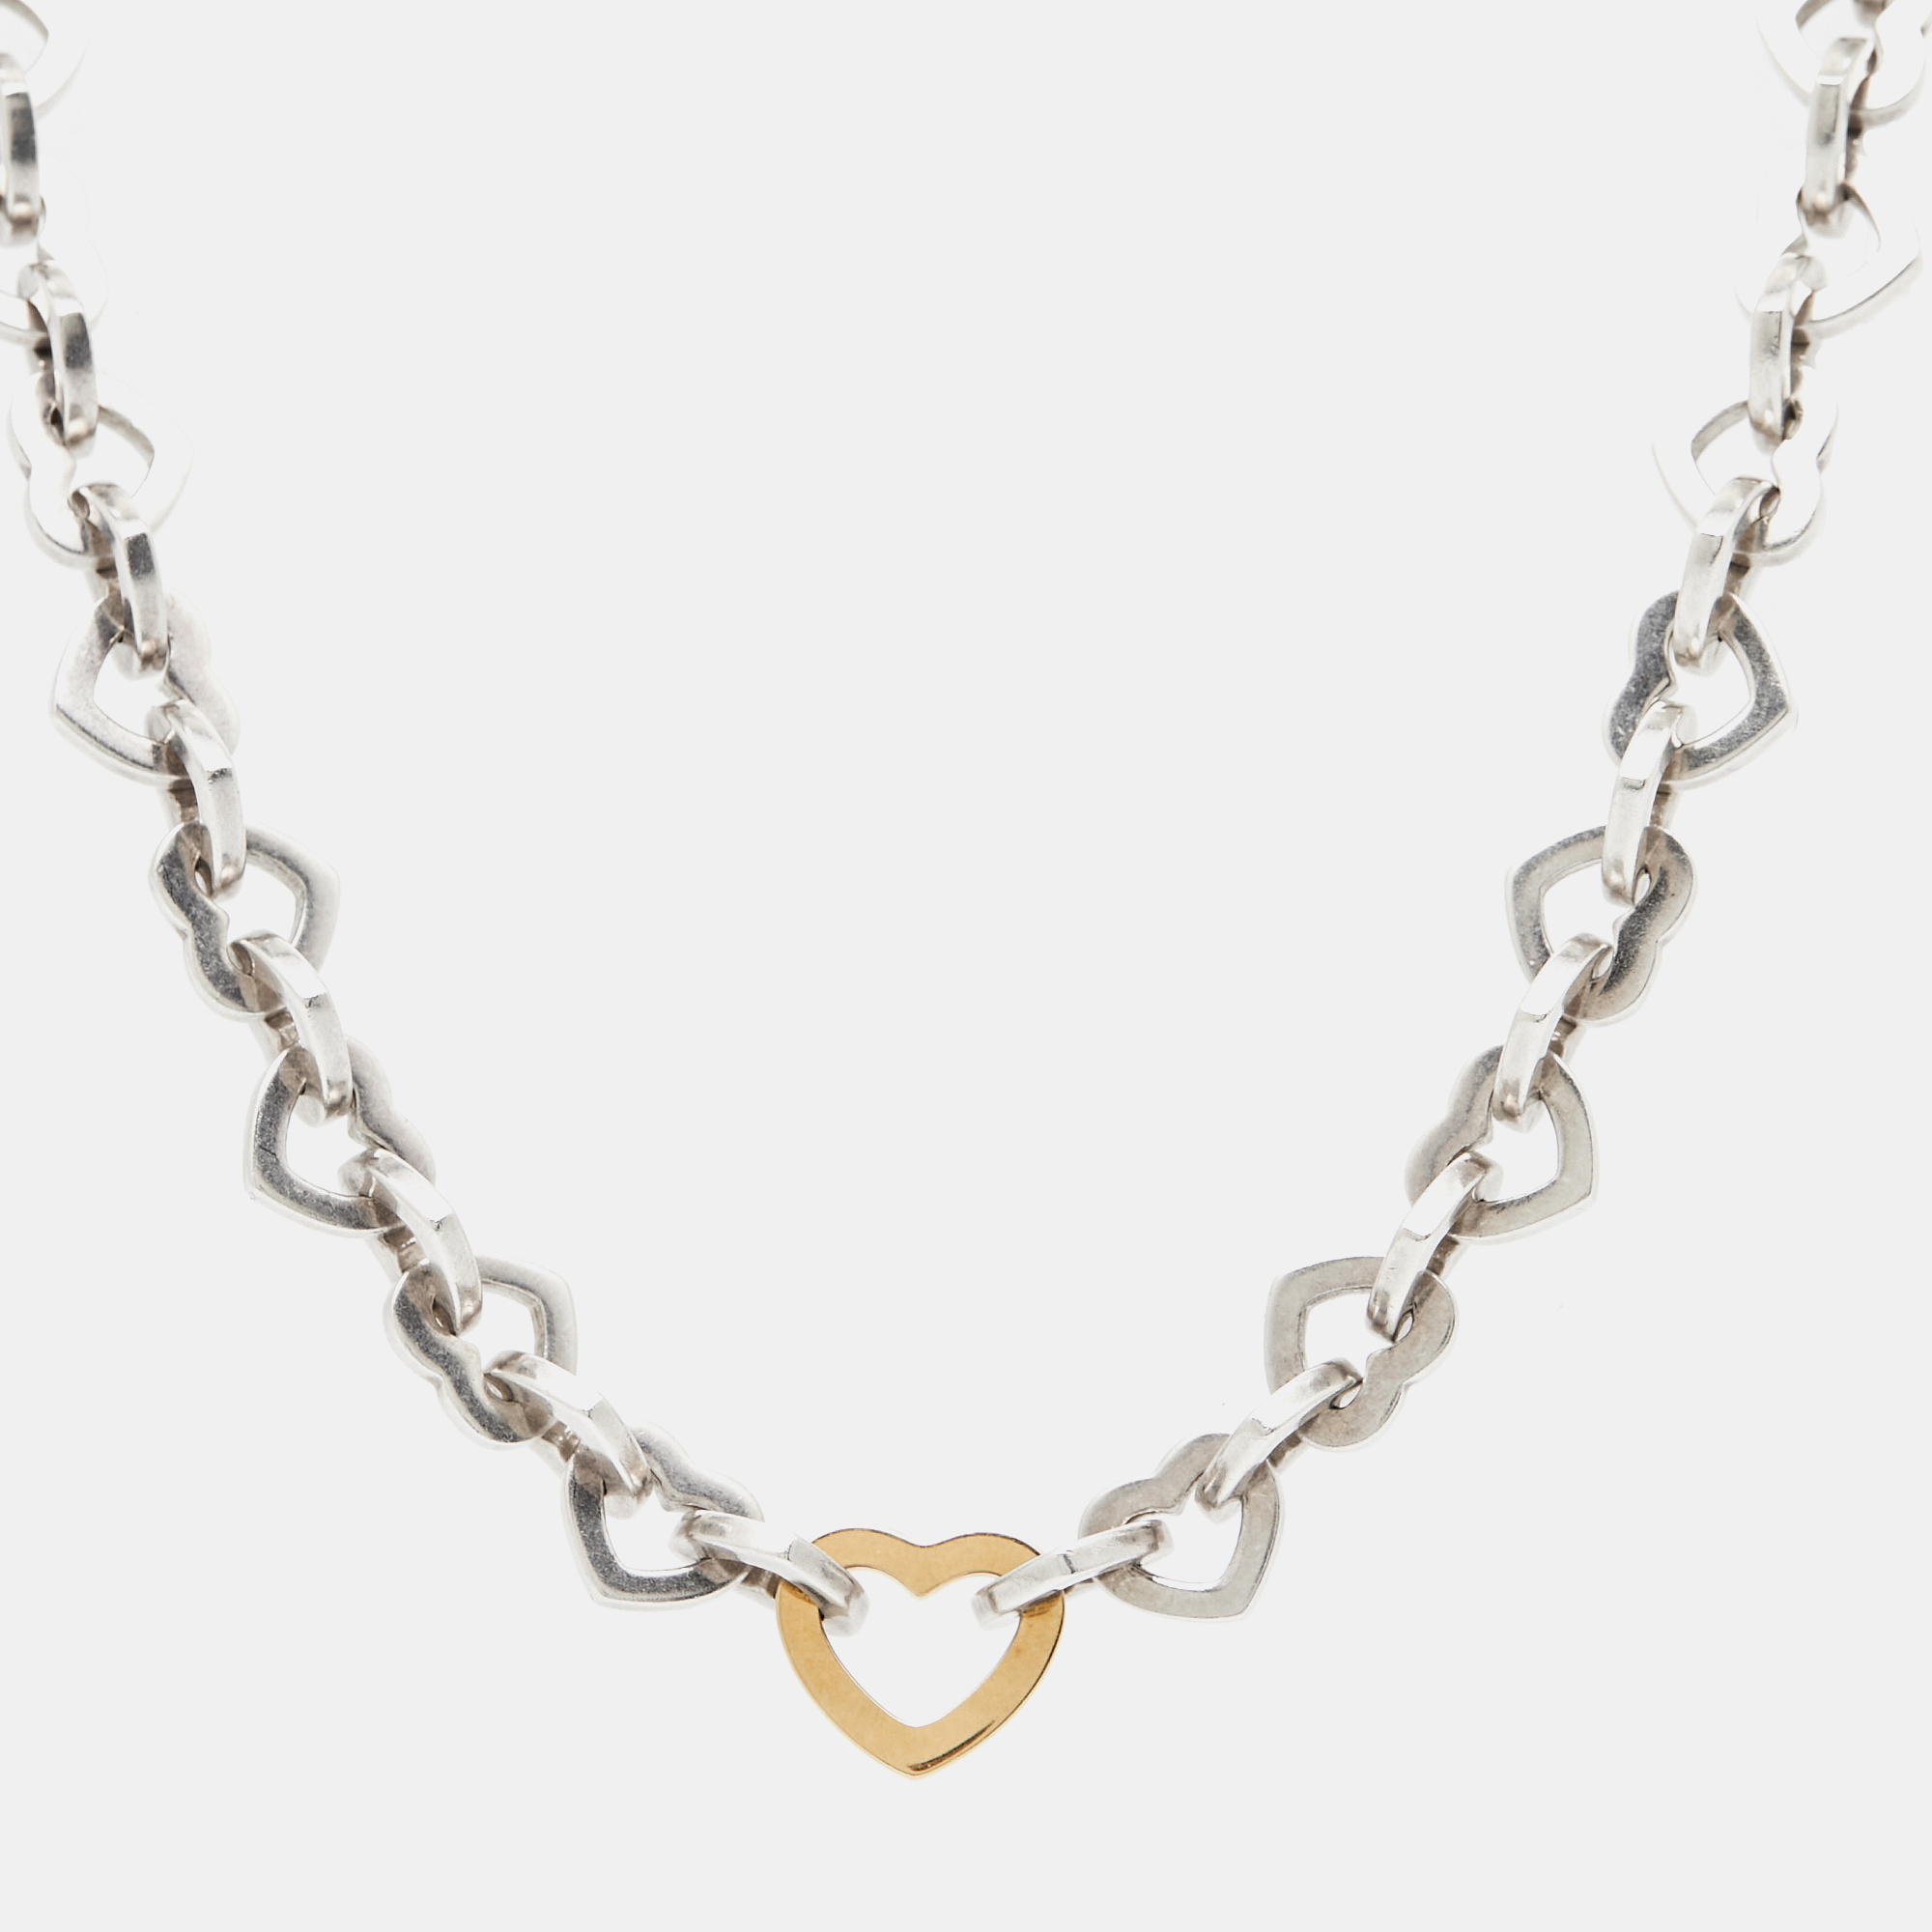 Presenting the exquisite Tiffany and Co. necklace a stunning blend of sterling silver and 18k yellow gold. This captivating piece exudes timeless charm with its heart design symbolizing love and connection. Elevate your style effortlessly with this elegant accessory perfect for any occasion.